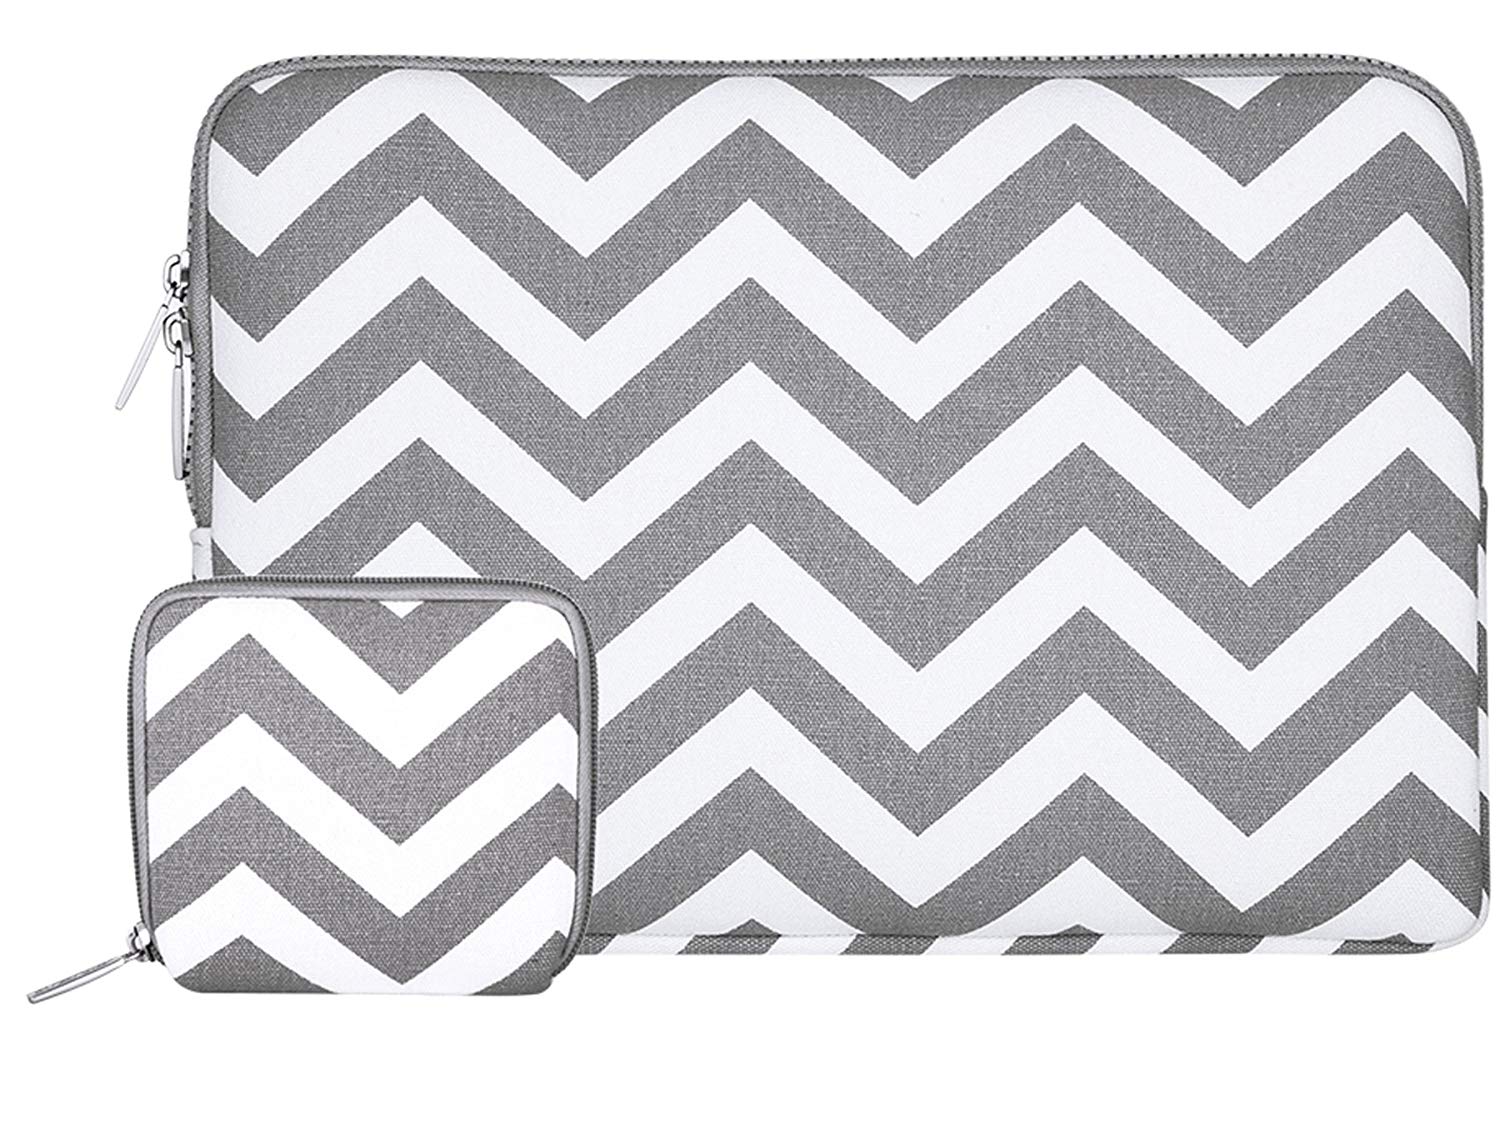 Mosiso Mosiso Chevron Style Canvas Fabric Laptop Sleeve Case Bag Cover for 13-13.3 Inch MacBook Pro, MacBook Air, Notebook with Small Case, Gray